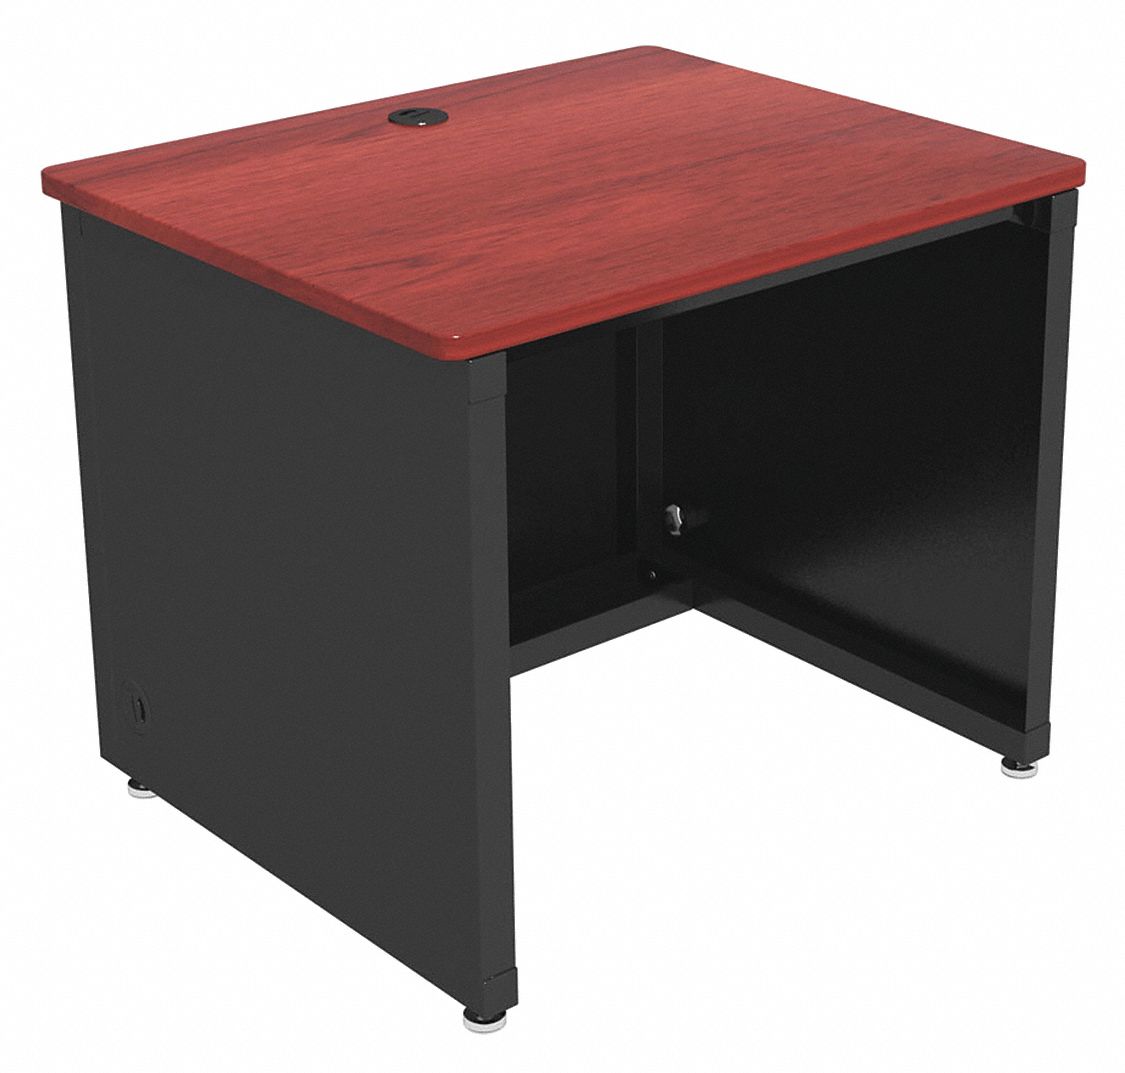 Enclosed Desk: CD Series, 36 in Overall Wd, 30 in, 30 in Overall Dp, Cherry Top